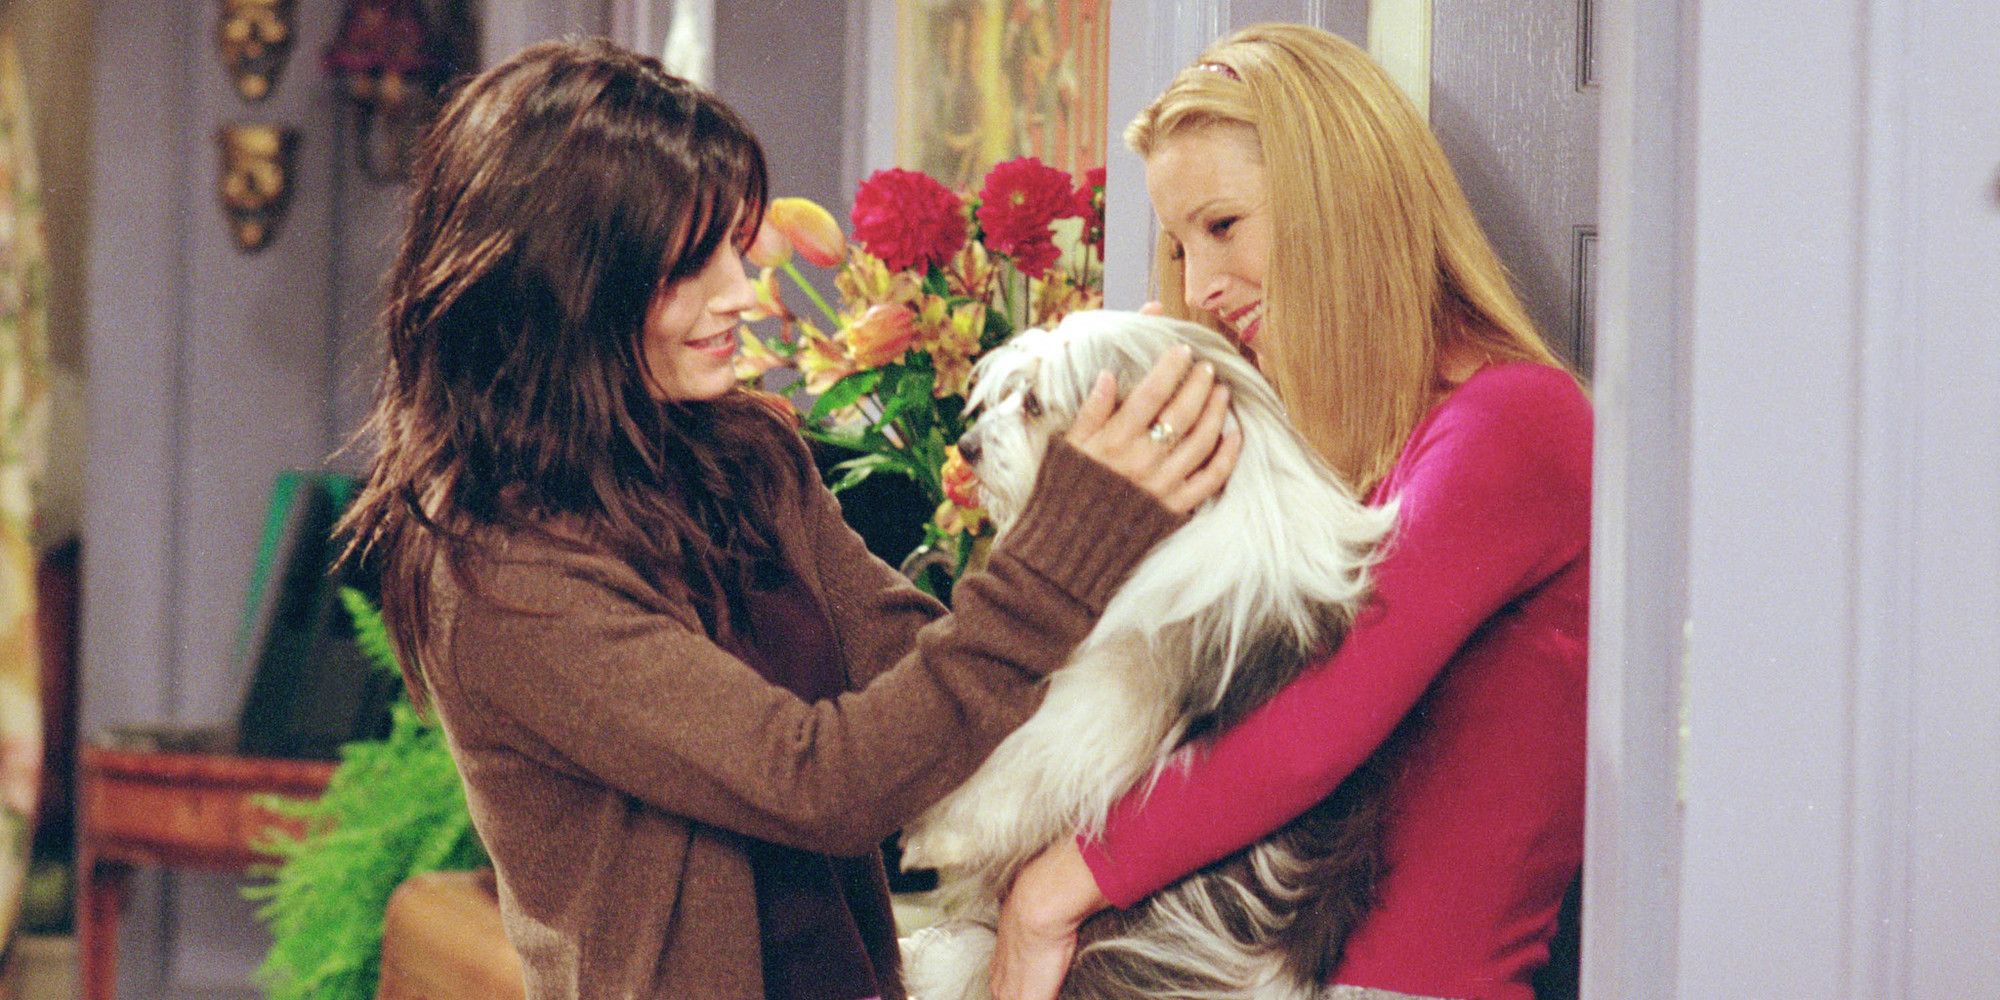 Friends Season 7, Episode 8, “The One Where Chandler Doesn’t Like Dogs”